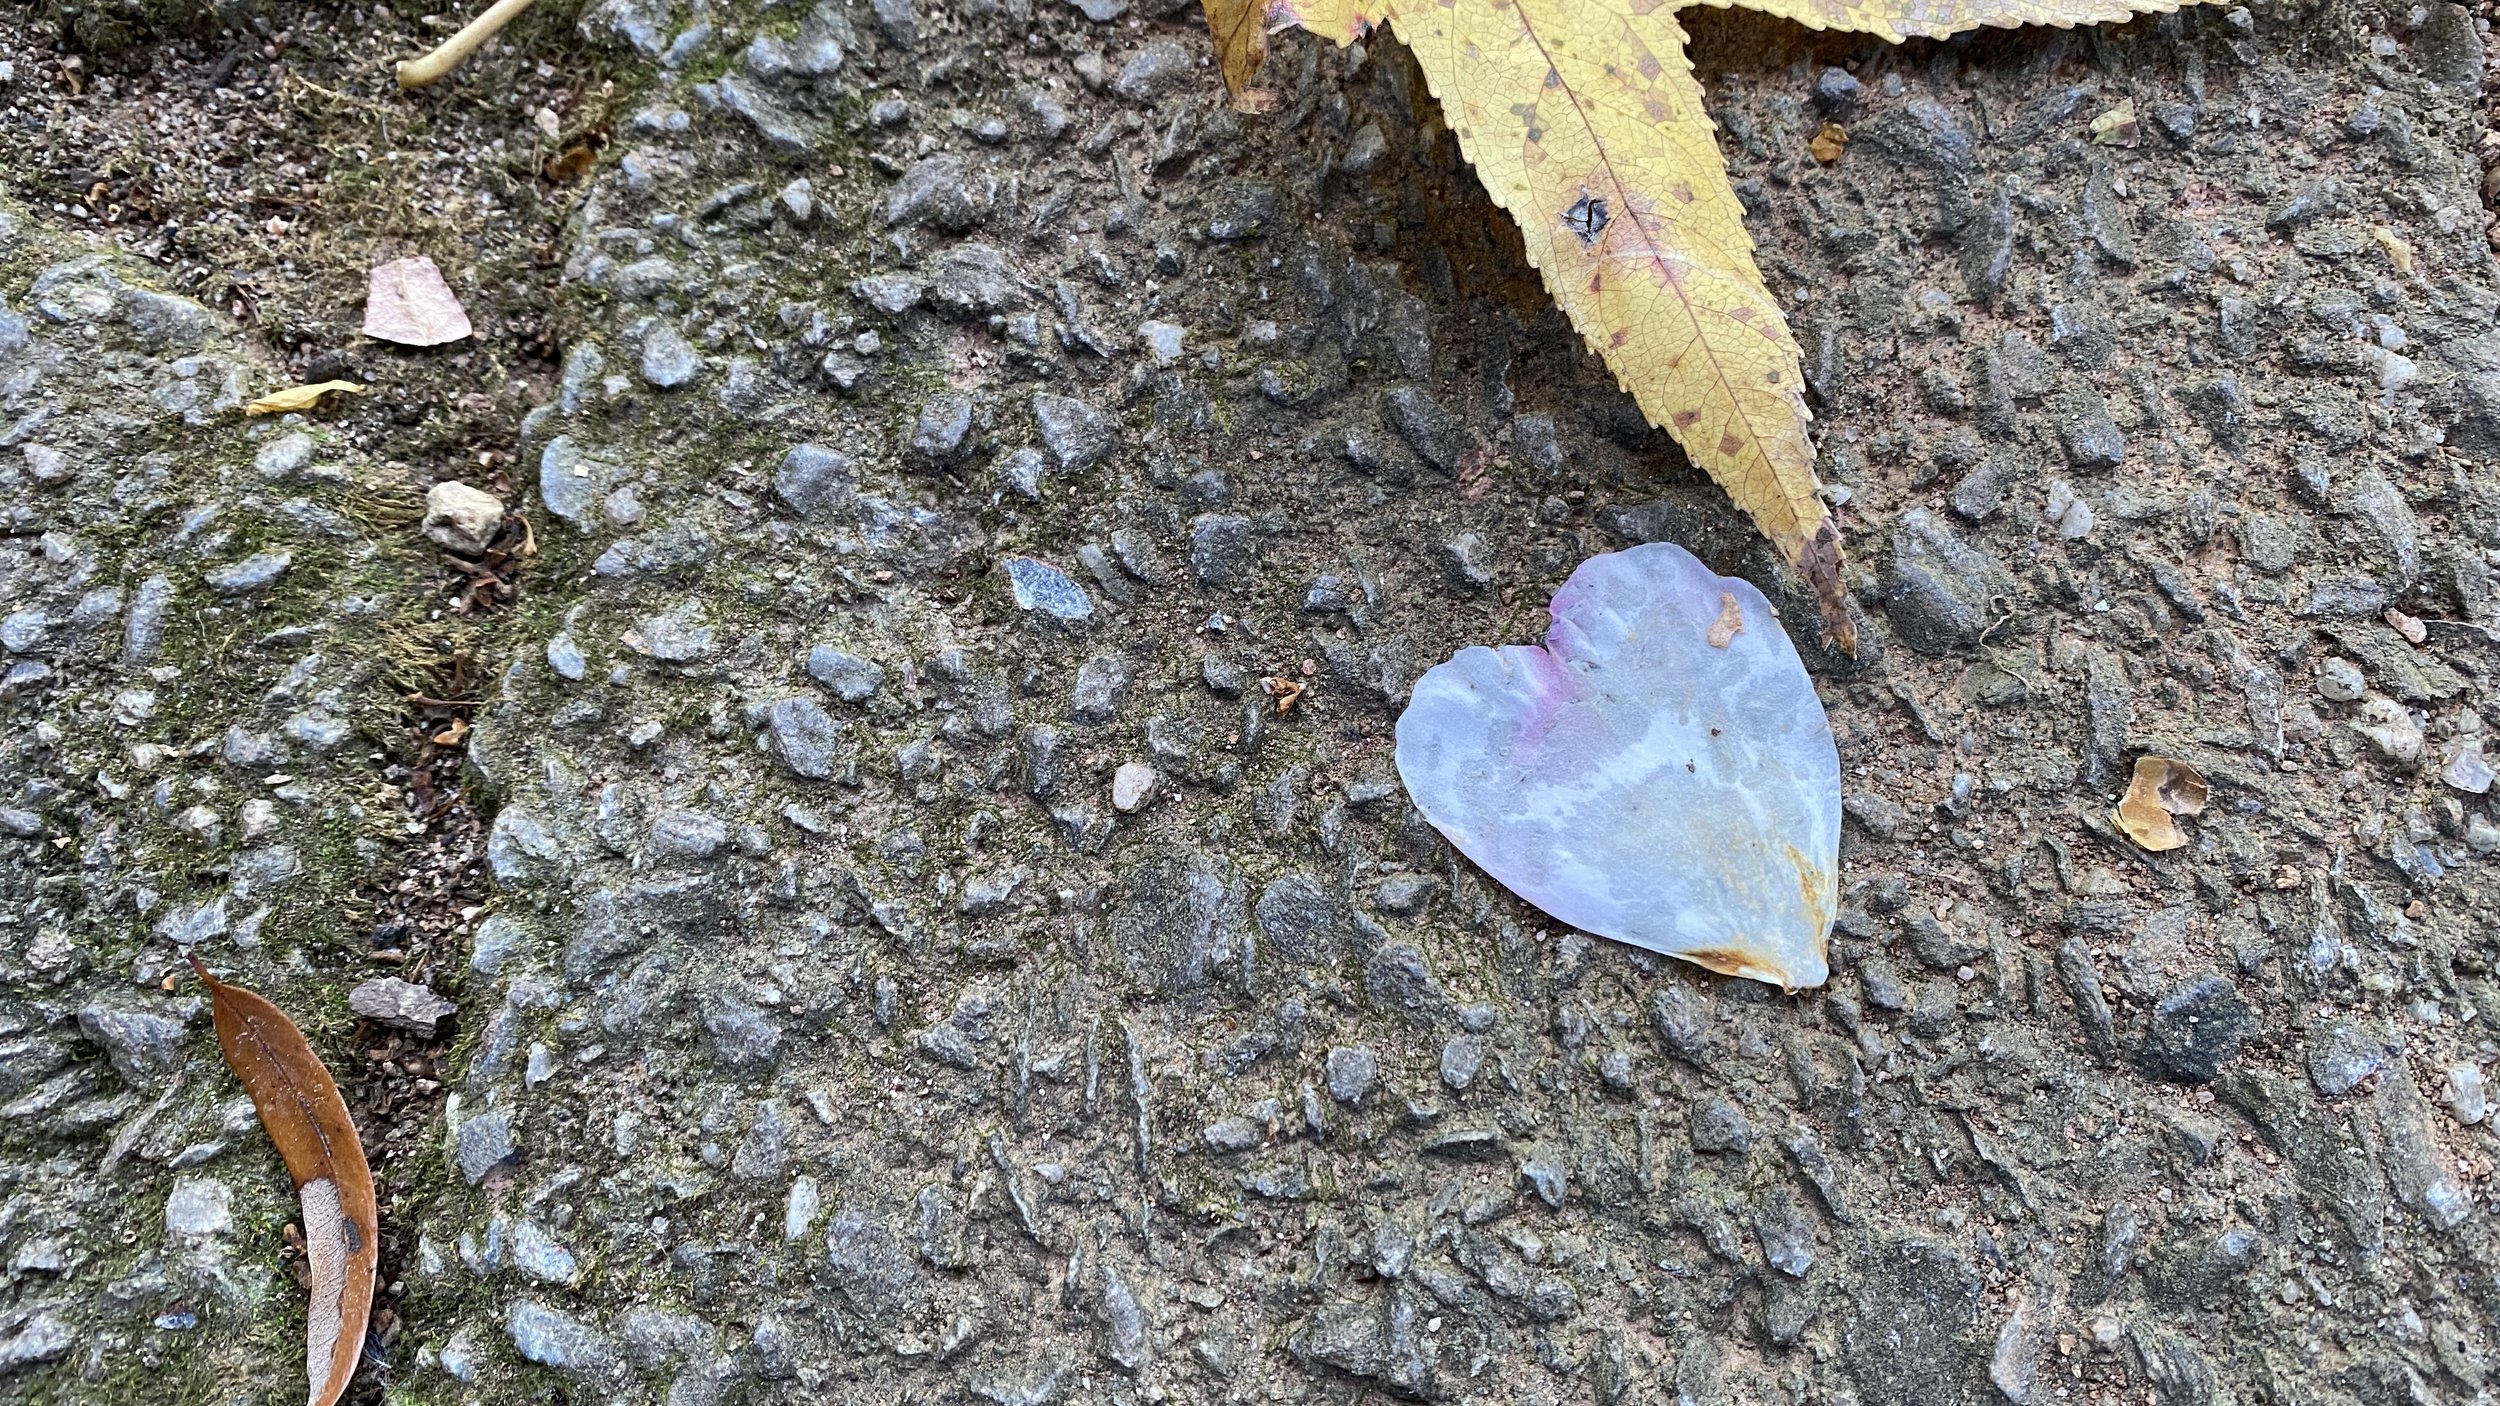   Felder Rushing ’s book  Garden Hearts  (2012, St. Lynn’s Press) inspired me to look for certain things in the garden… mainly for hearts.   I came upon this this morning… one fallen petal from the shattered bloom of an as-of-yet-unidentified  Camell